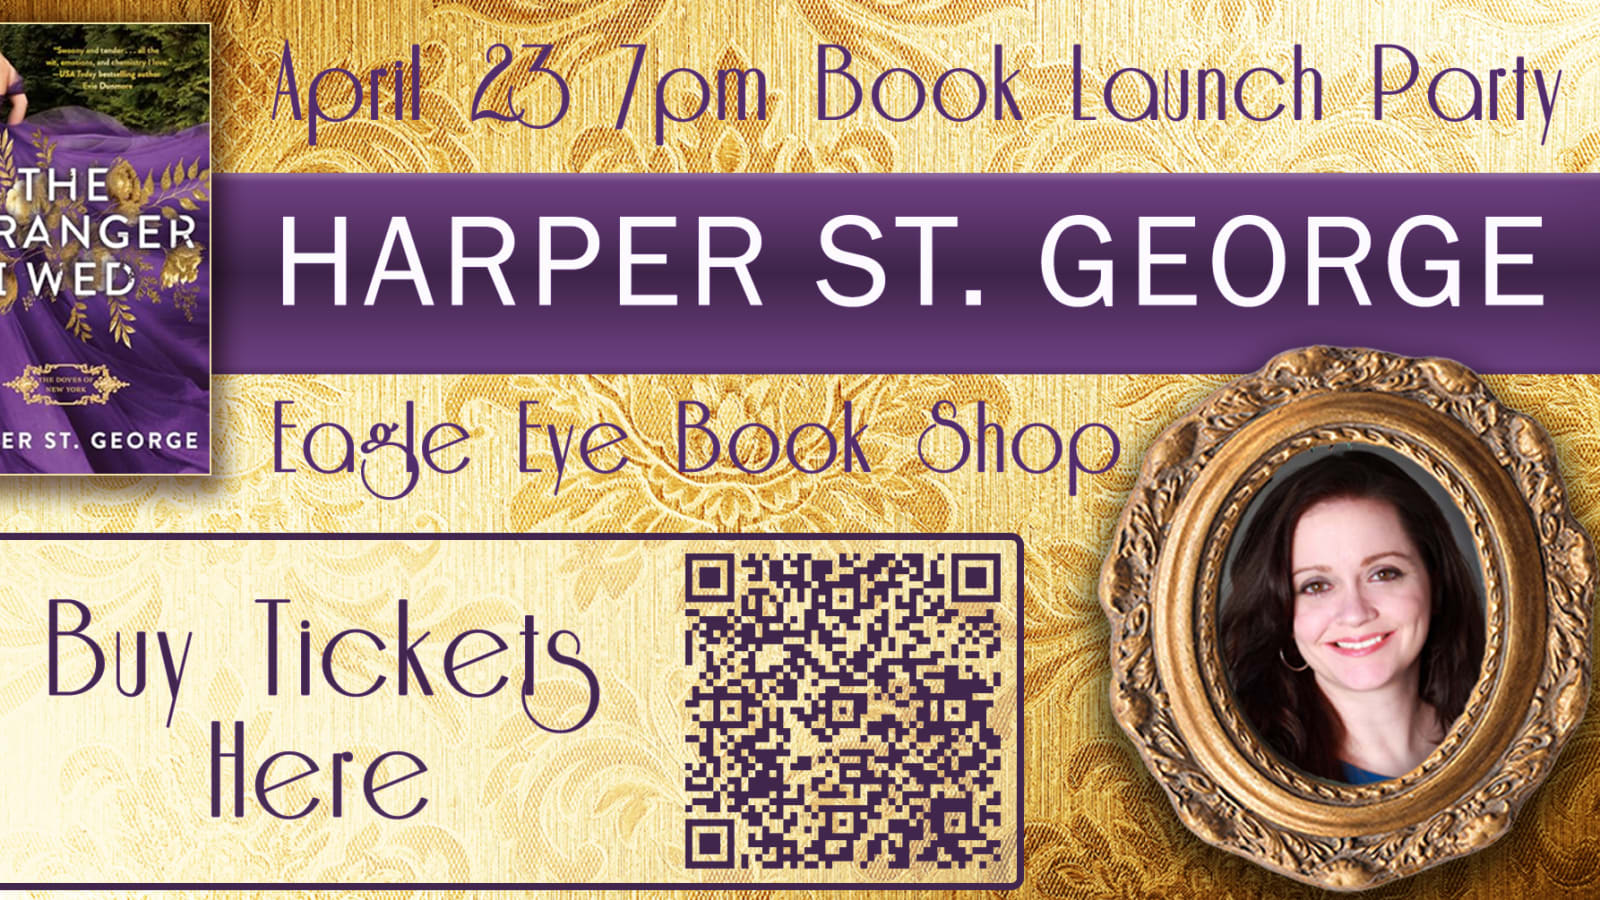 Harper St. George Book Launch Party